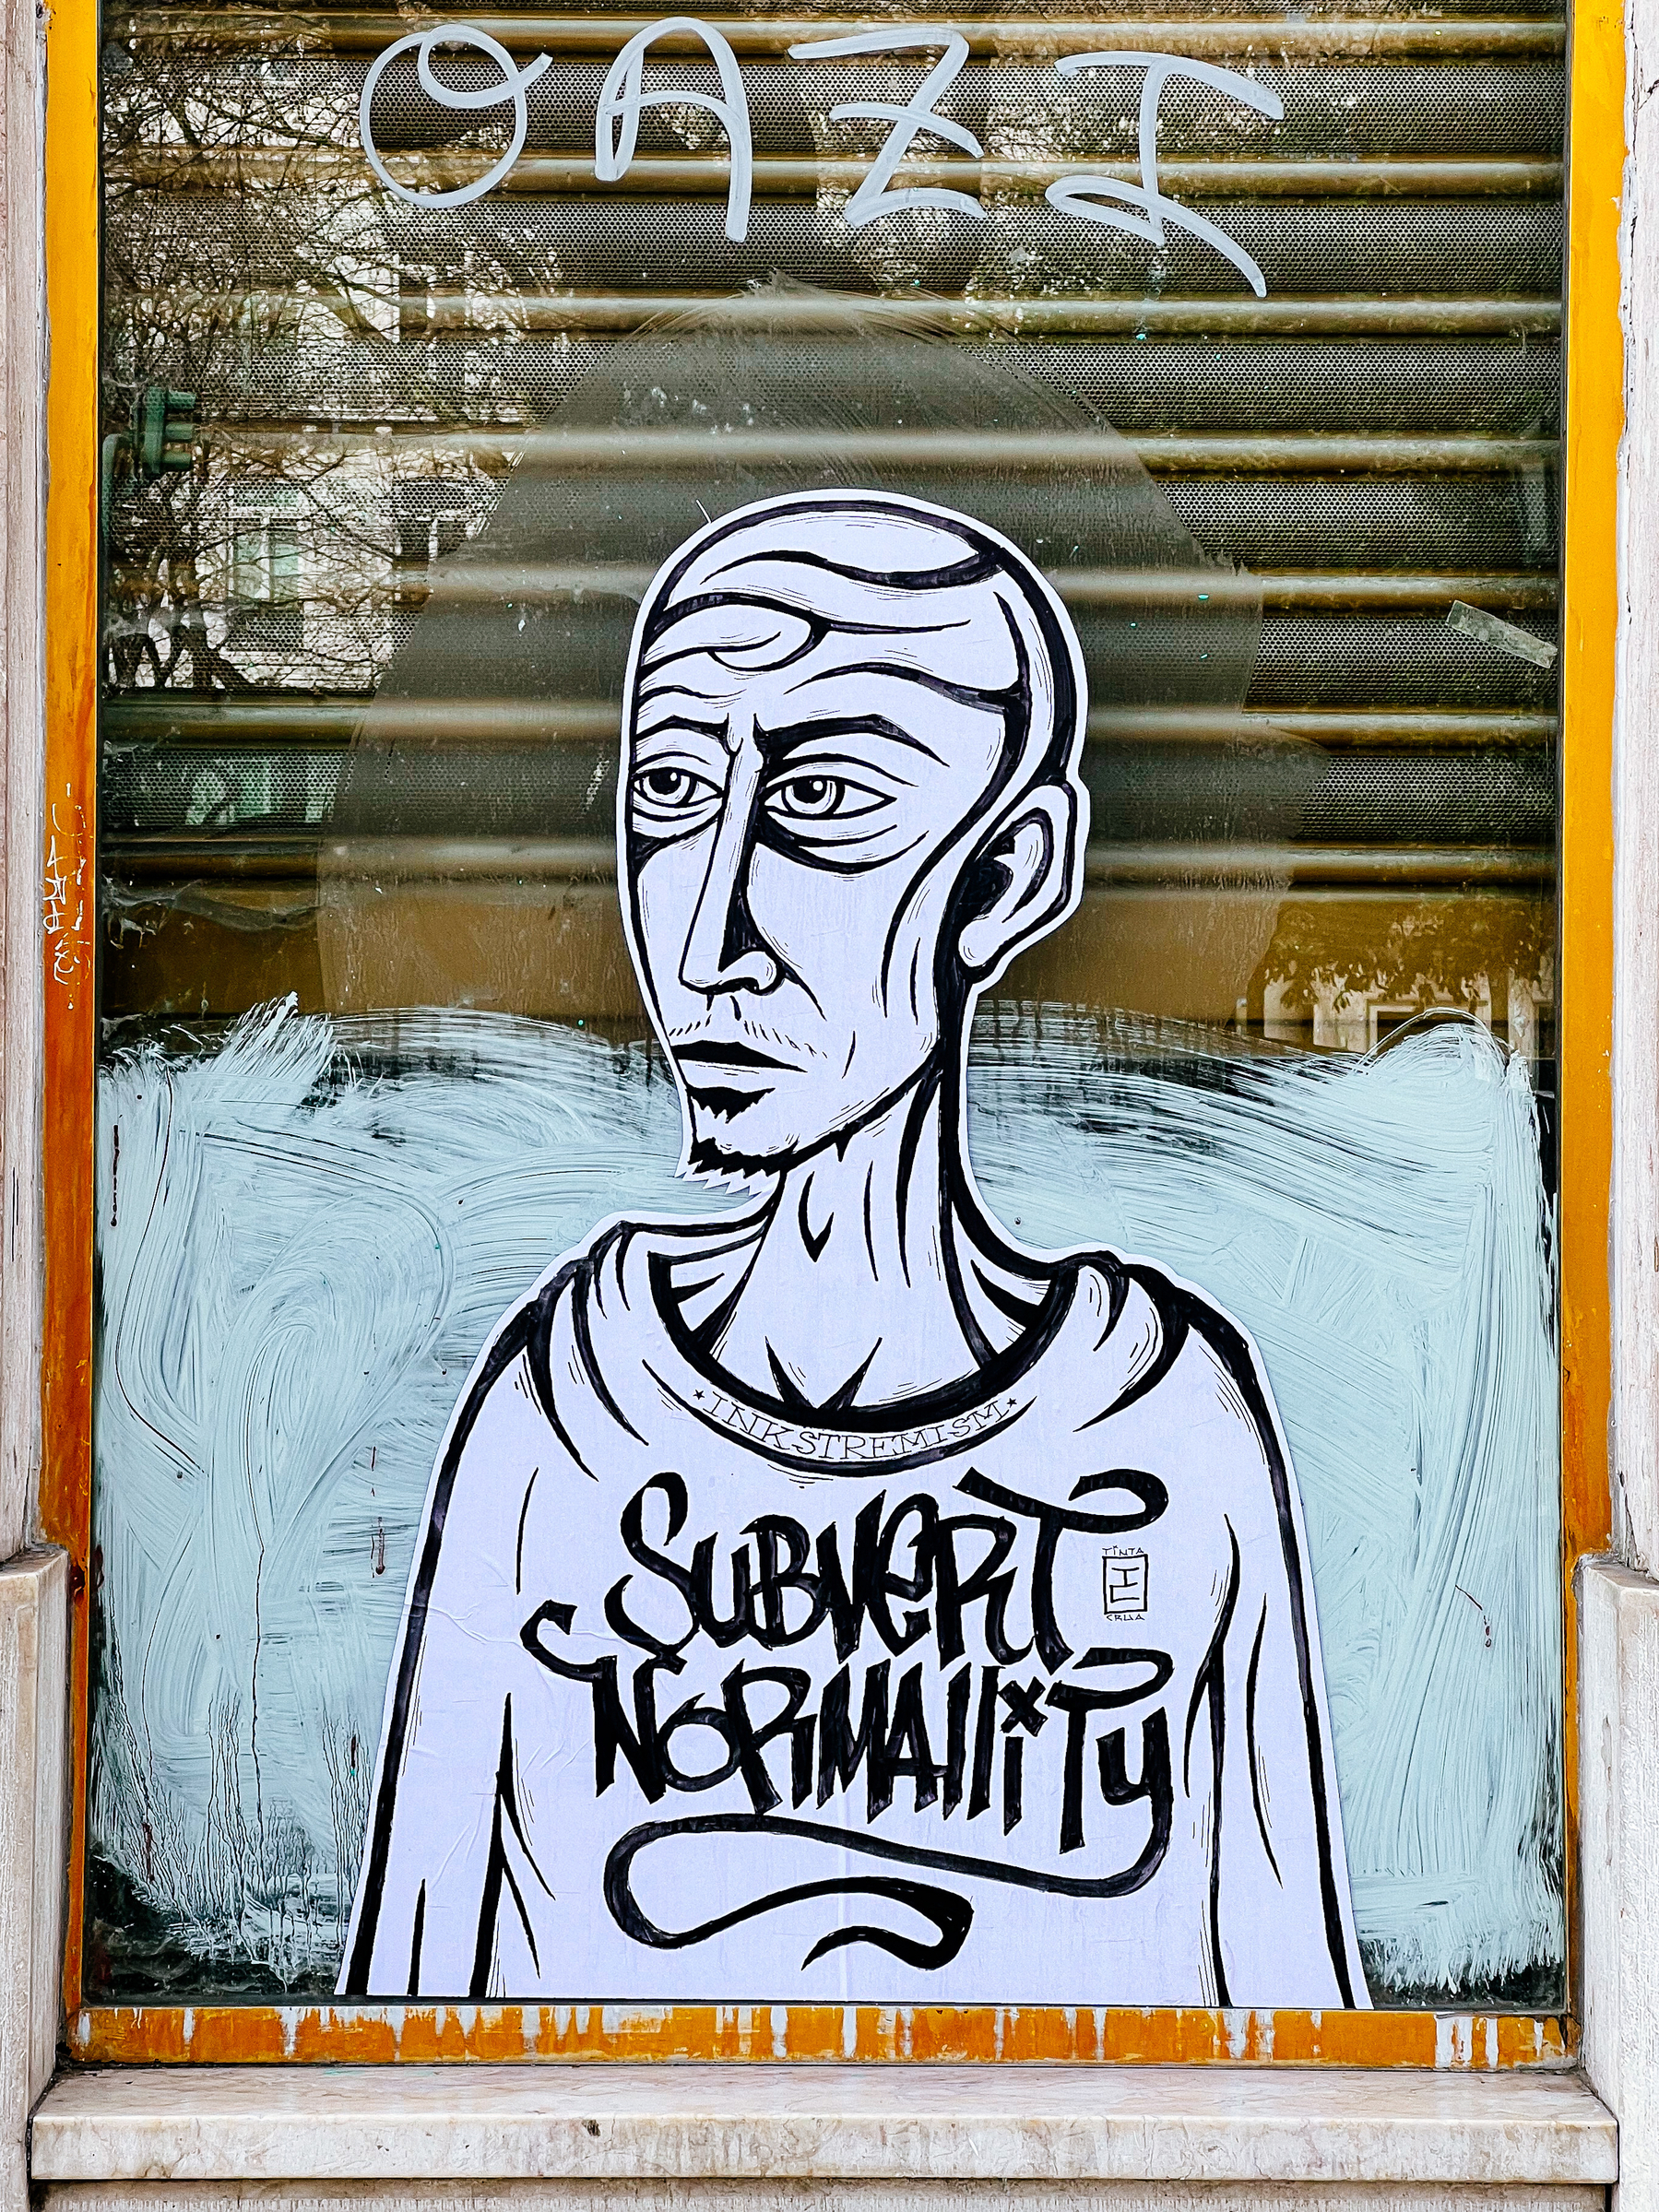 Big sticker on a window, with the words “Subvert normality”. 